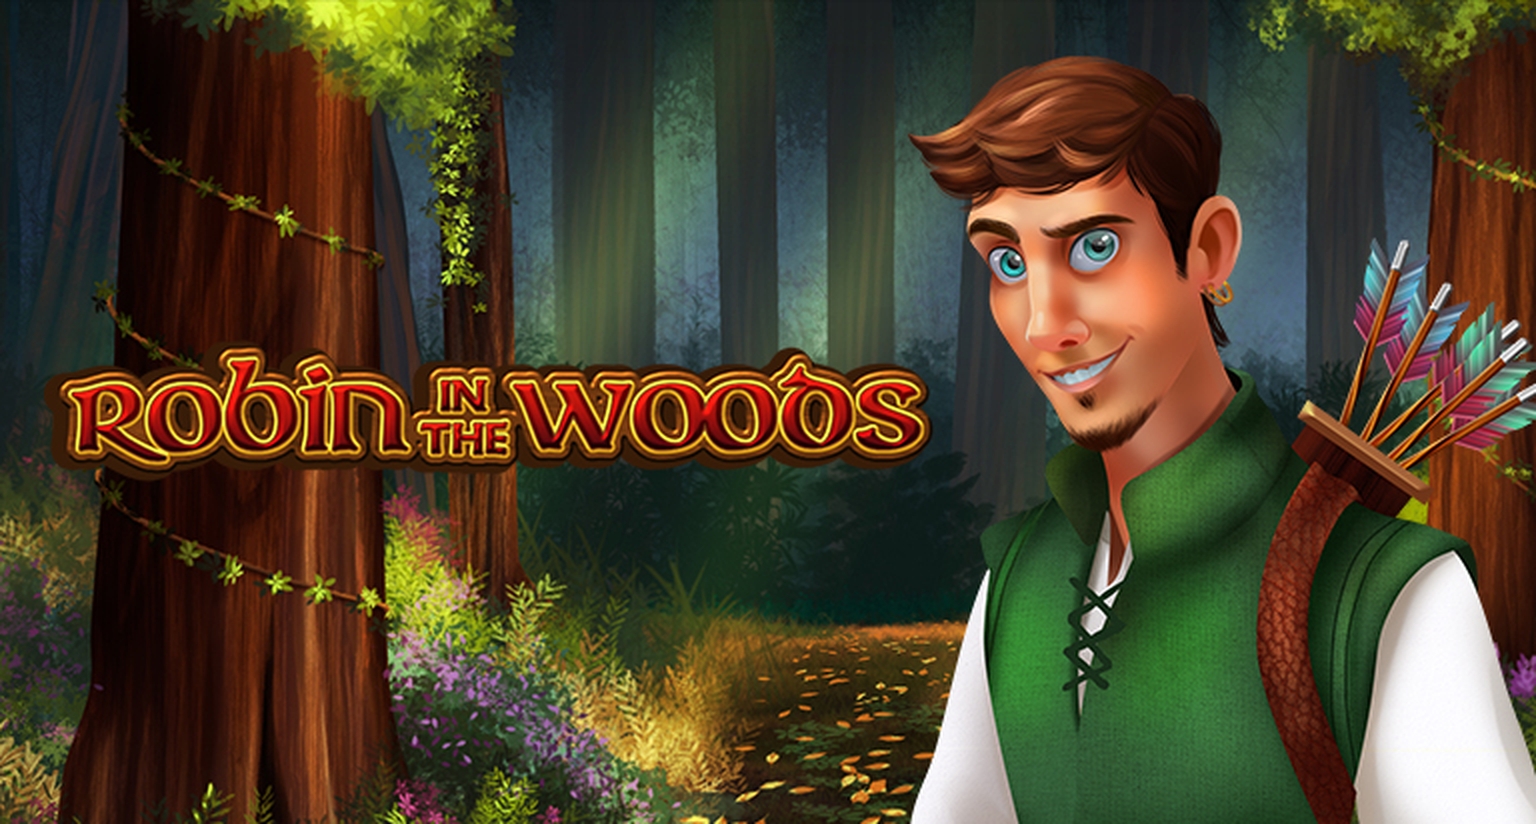 The Robin in the Woods Online Slot Demo Game by Arrows Edge